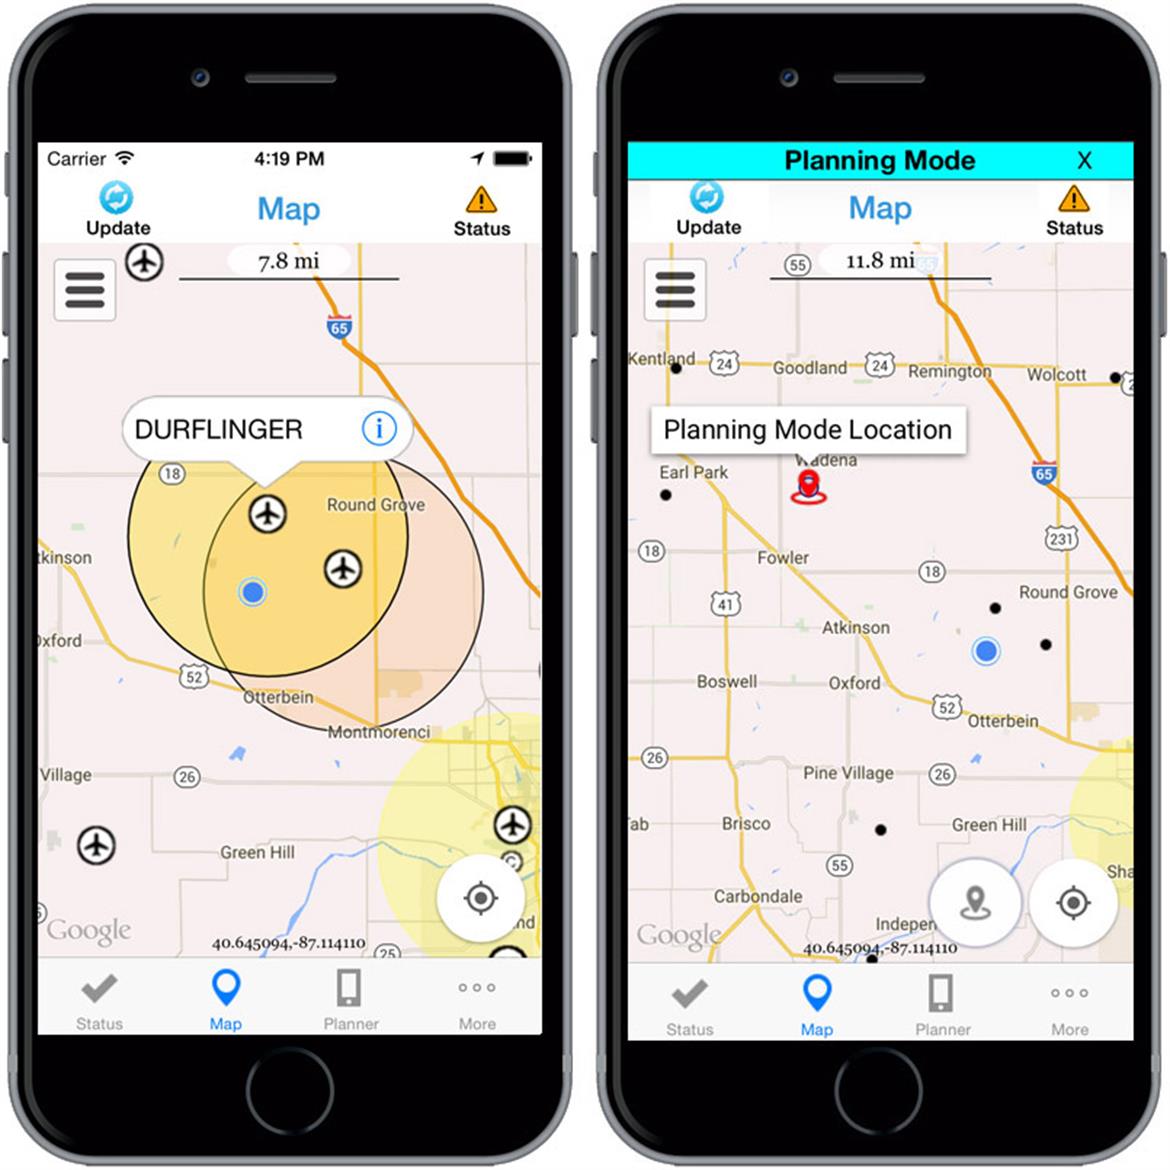 FAA B4UFLY App Gives Drone Operators Heads Up On No-Fly Zones (And Wildfires)